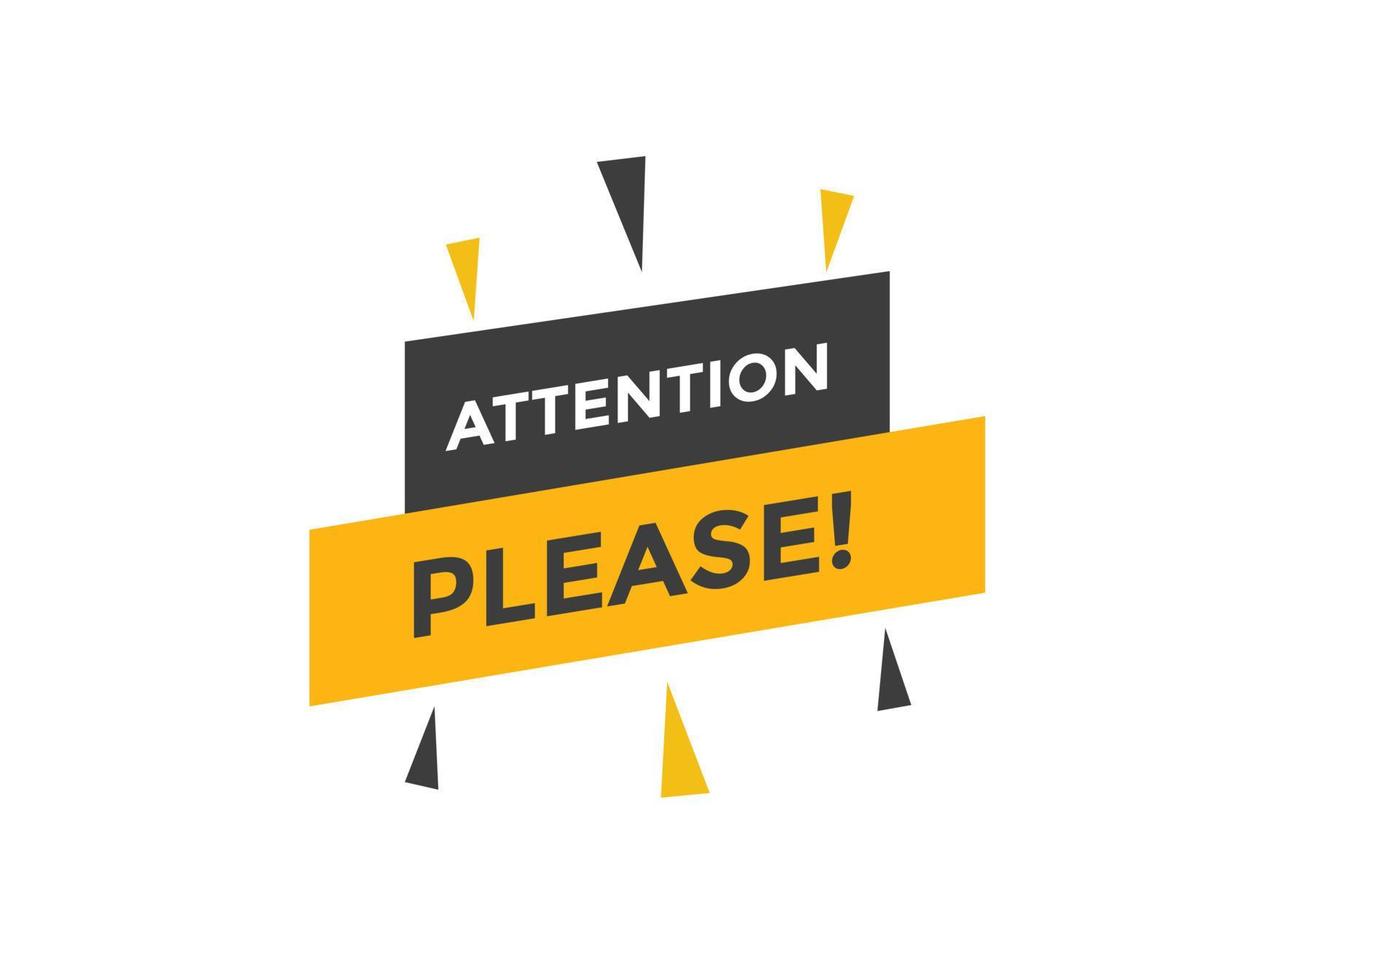 Attention please text web button template. Attention please sign icon label colorful vector